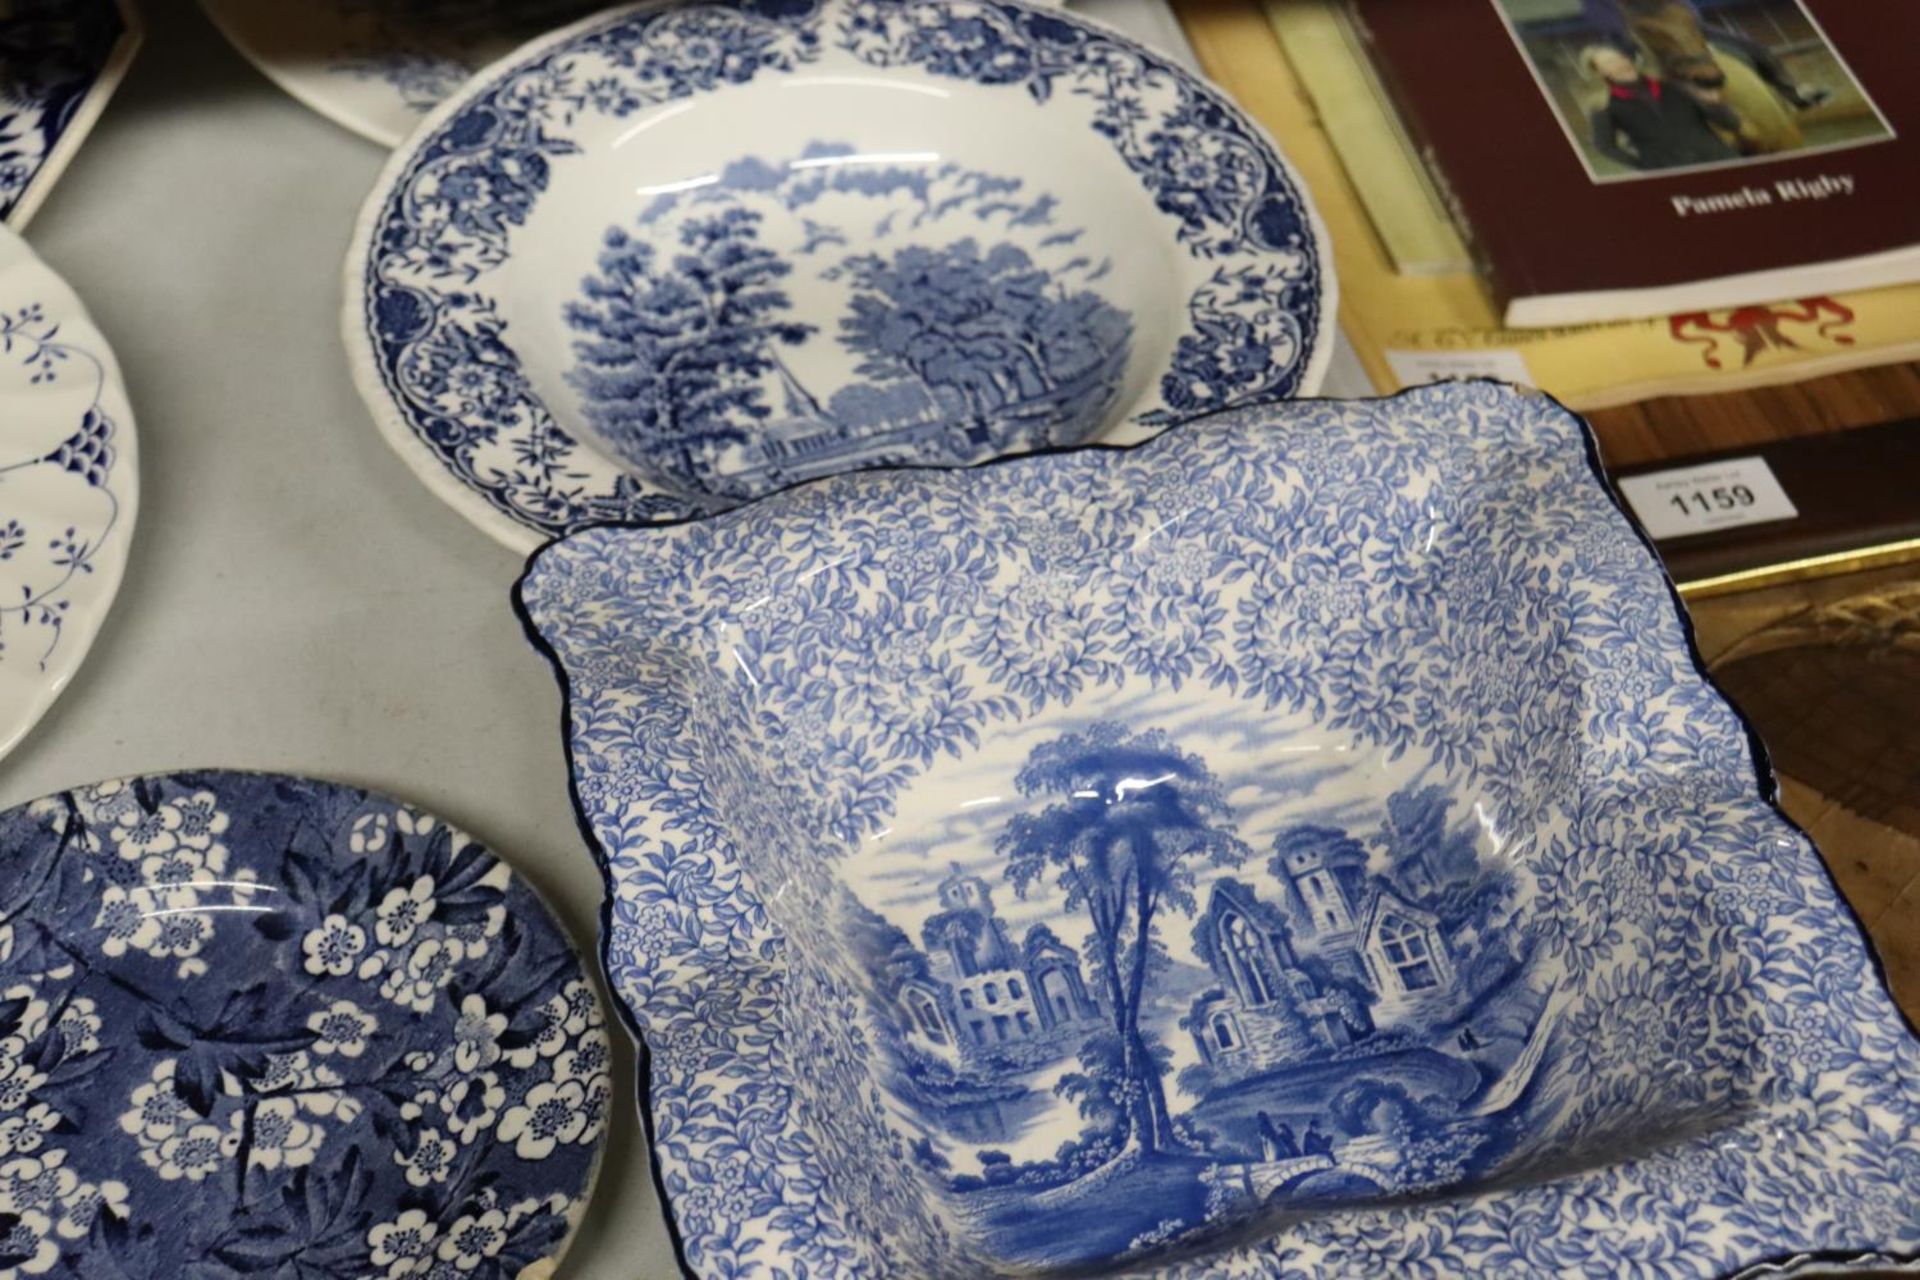 A QUANTITY OF COLLECTOR'S PLATES AND SHALLOW BOWLS TO INCLUDE FENTON CHINA, MYOTT FINLANDIA, ROYAL - Image 4 of 5